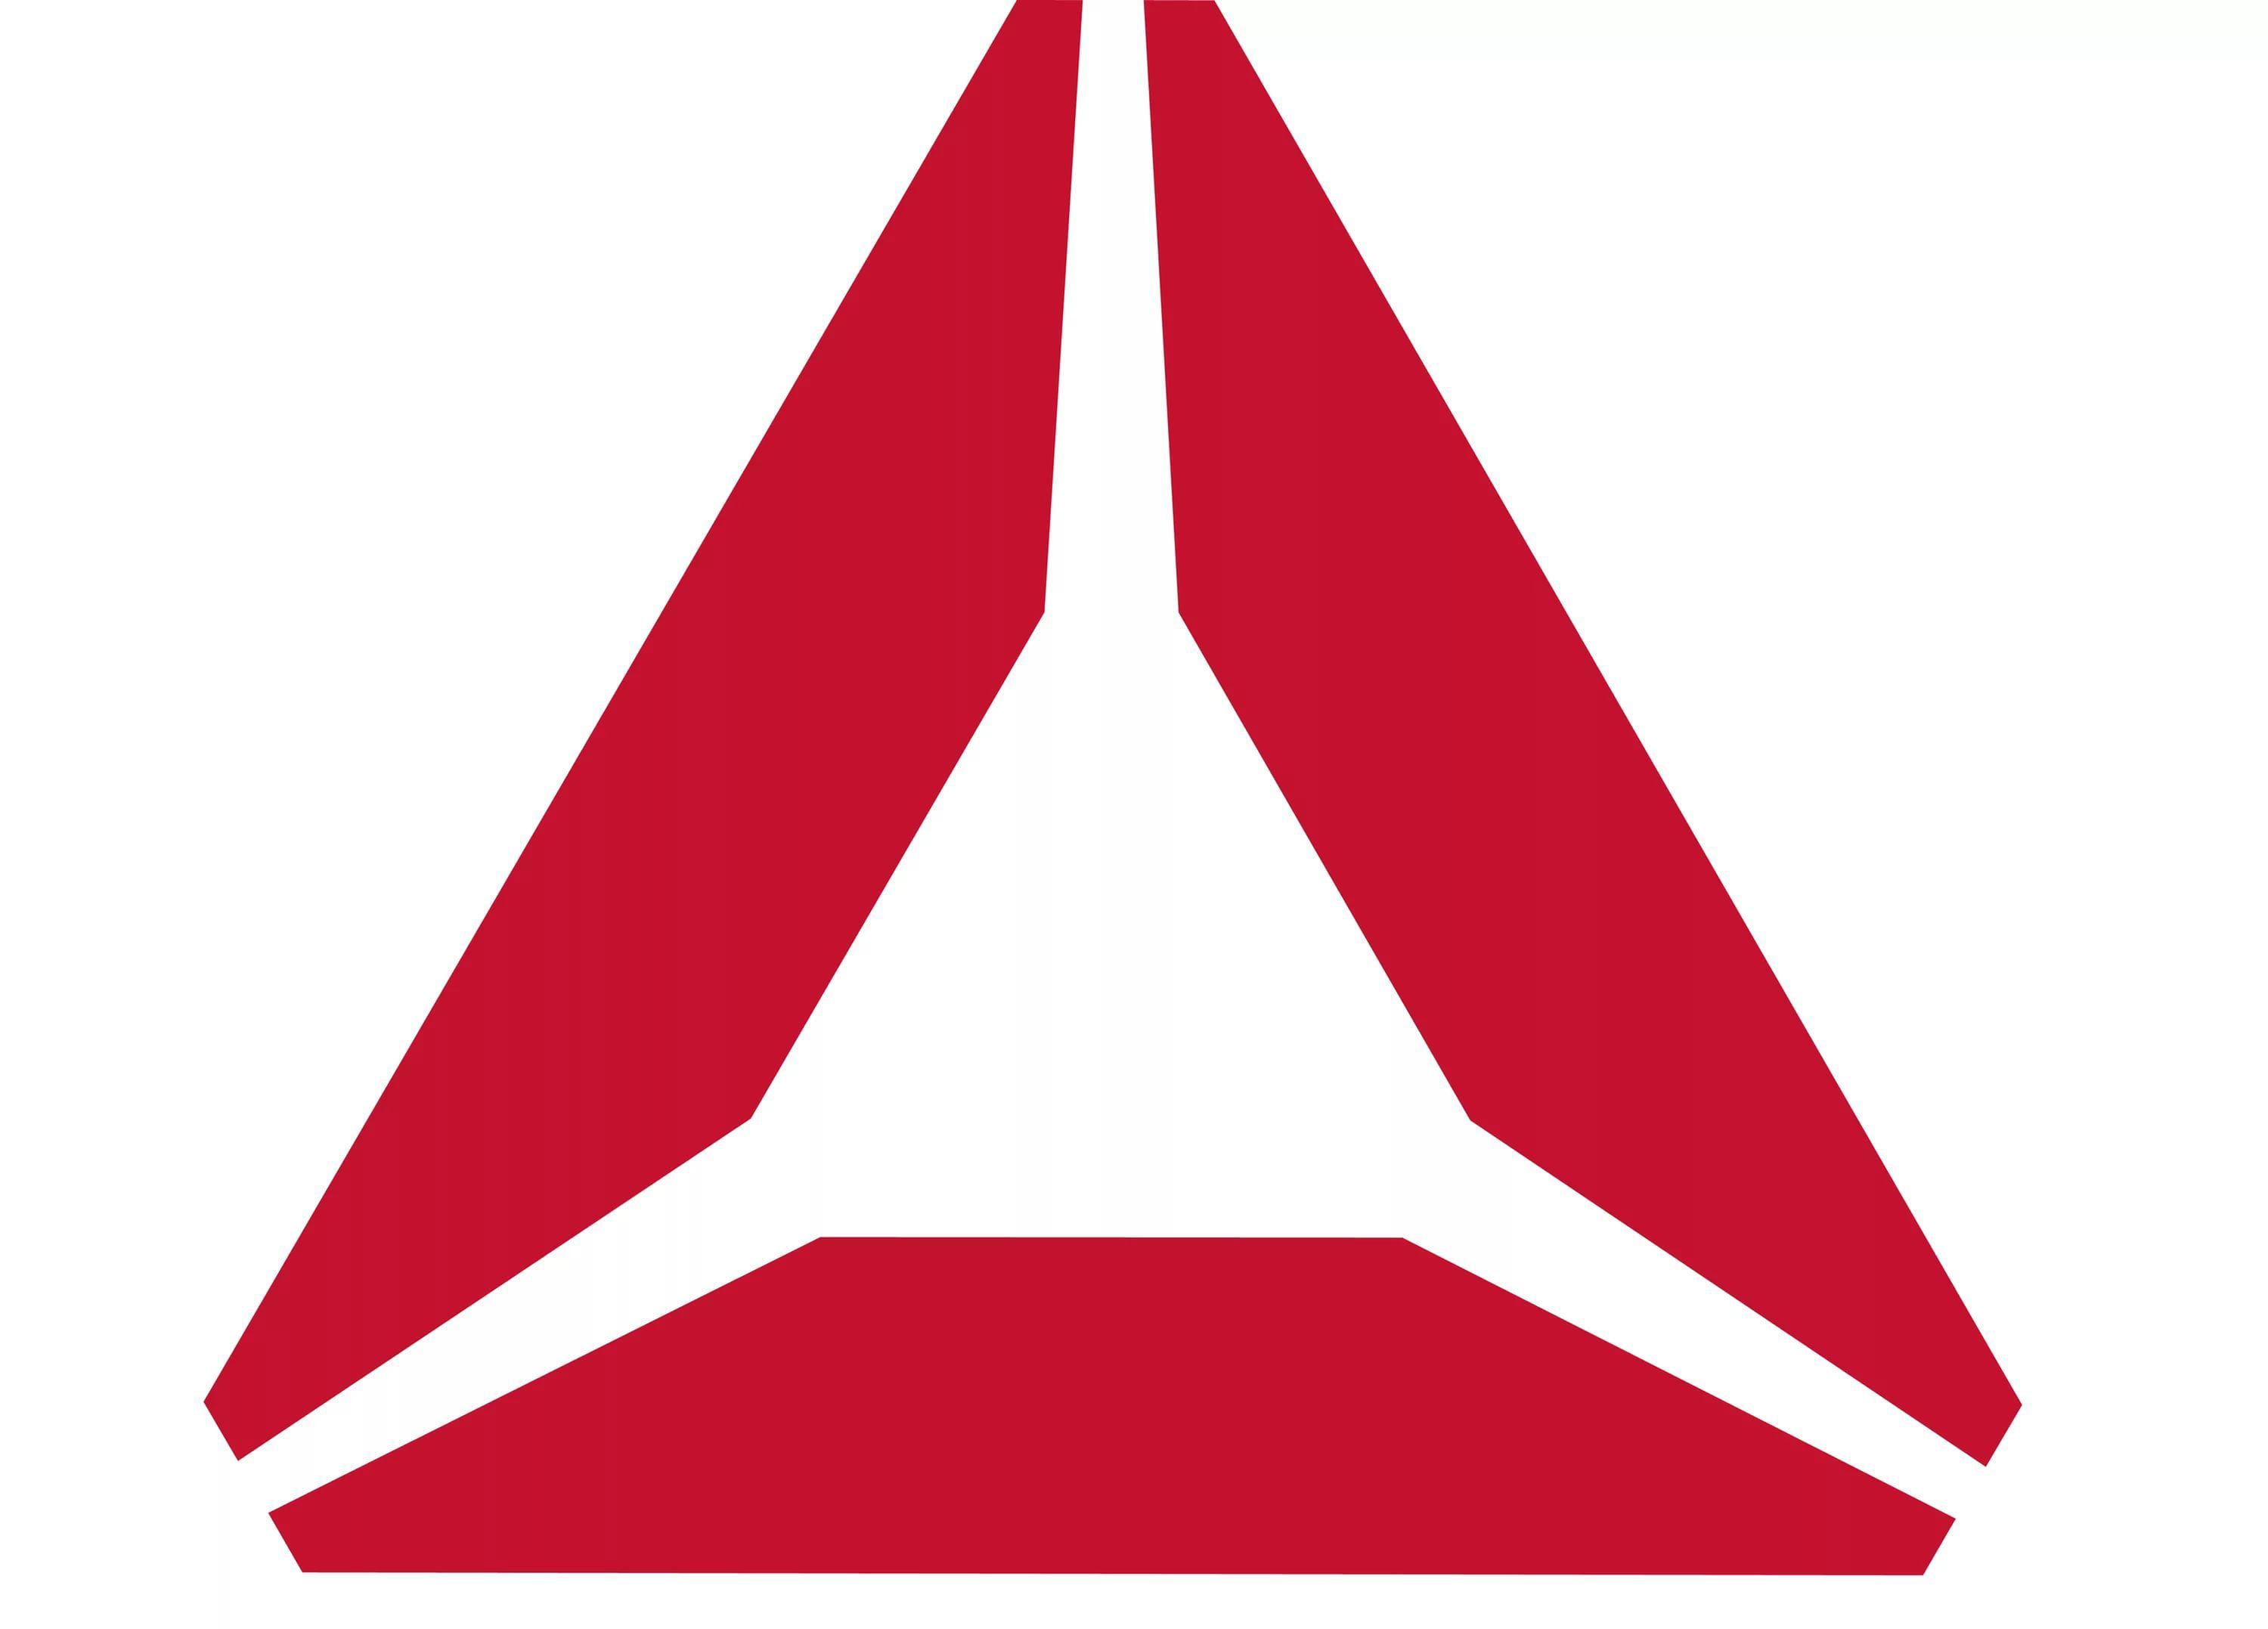 Blue with a Red Triangle Logo - Reebok Logo, symbol, meaning, History and Evolution